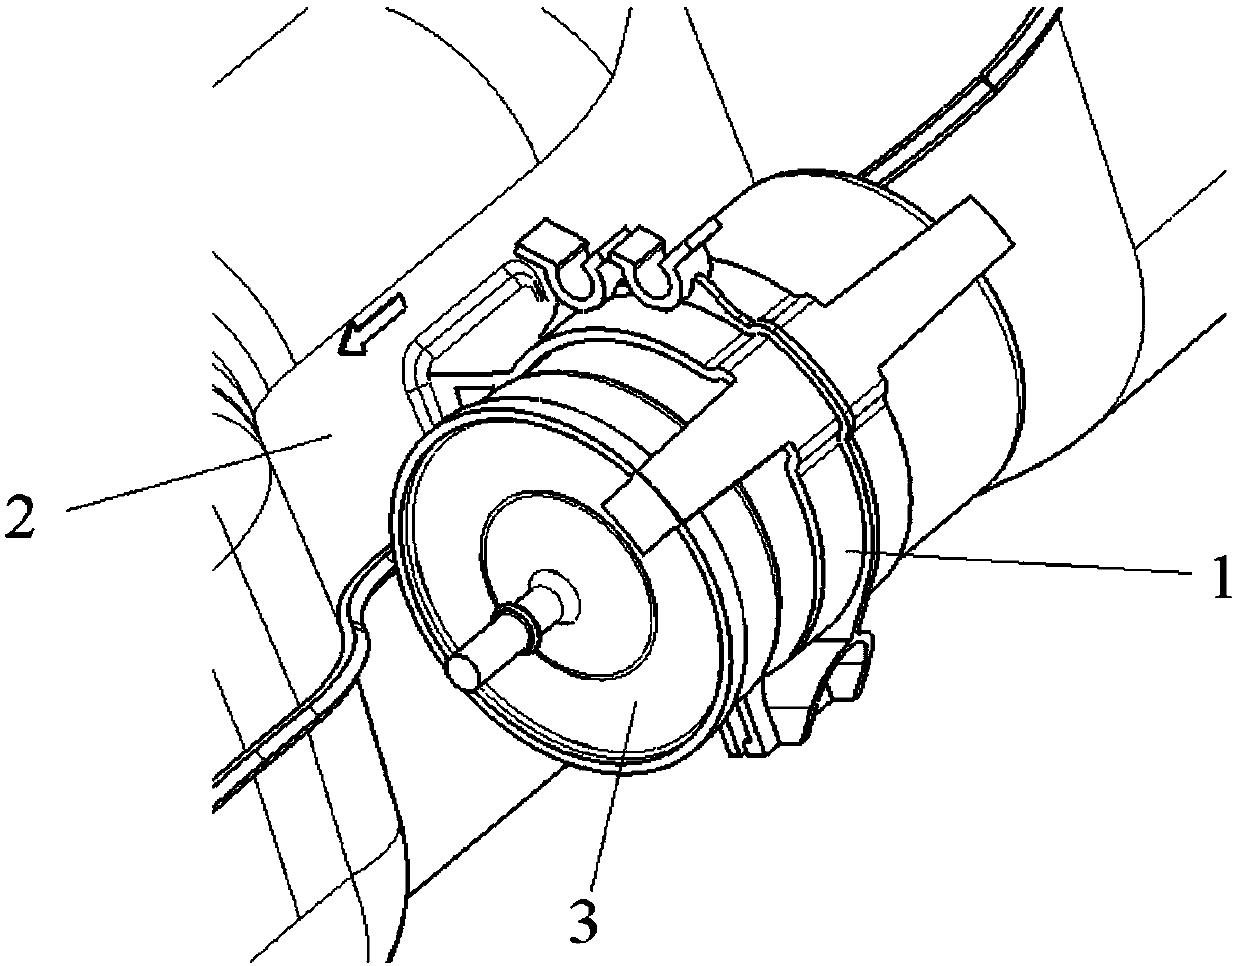 Fixed support of fuel filter and automobile